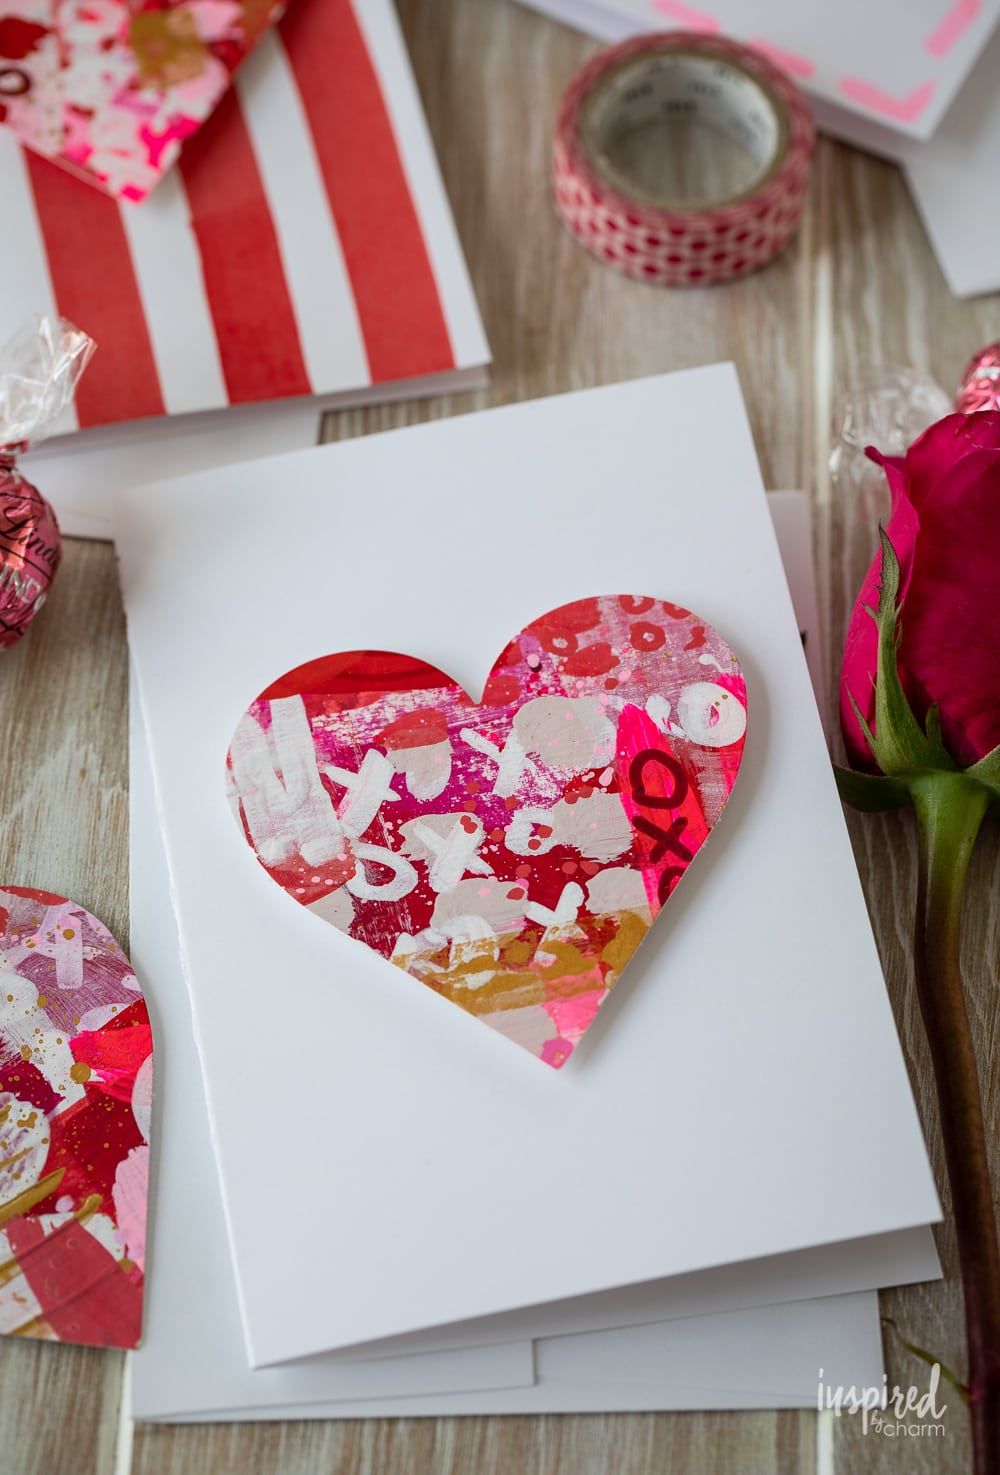 Buy Happy Valentines Day For My Love: Valentines Day Gift: Card Alternative  To Make That Special Someone Feel Great! Book Online at Low Prices in India